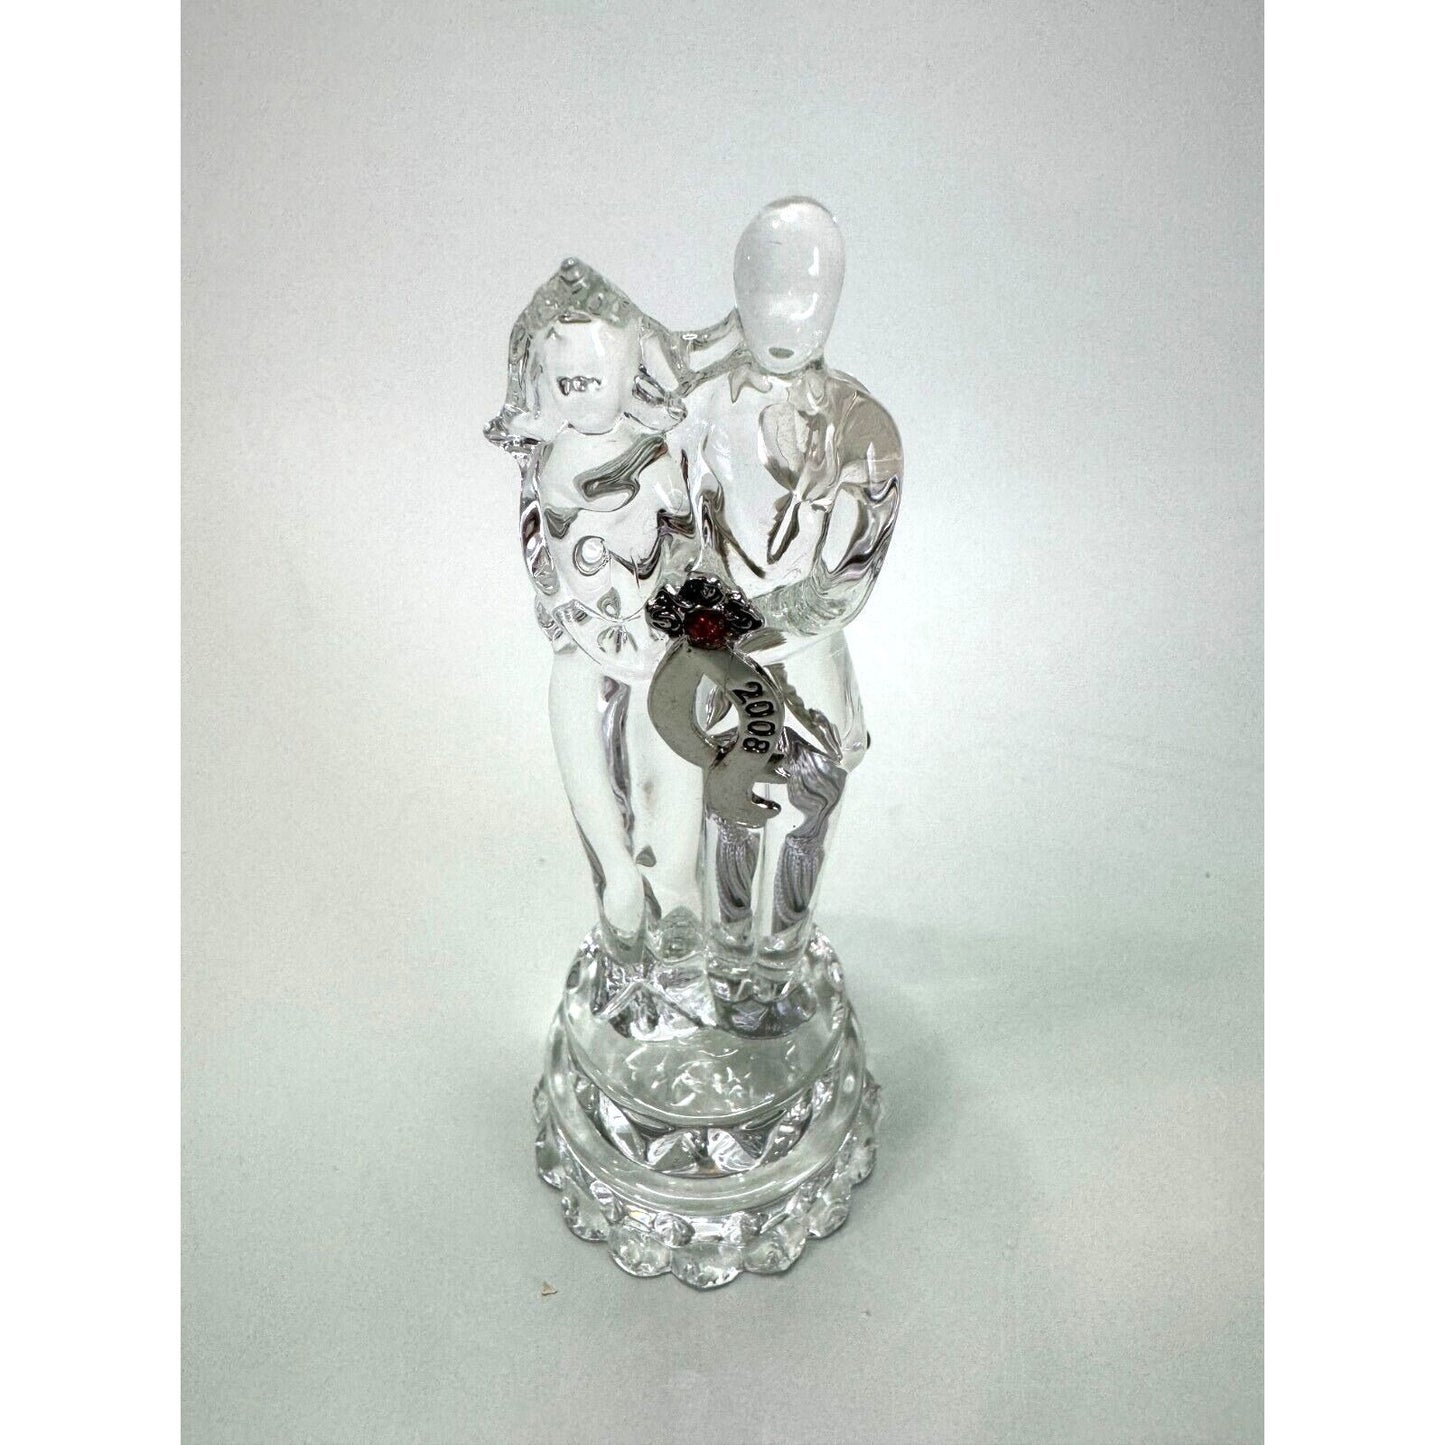 Lenox Crystal 2008 Annual Bride And Groom Ornament Dated 2008 Boxed